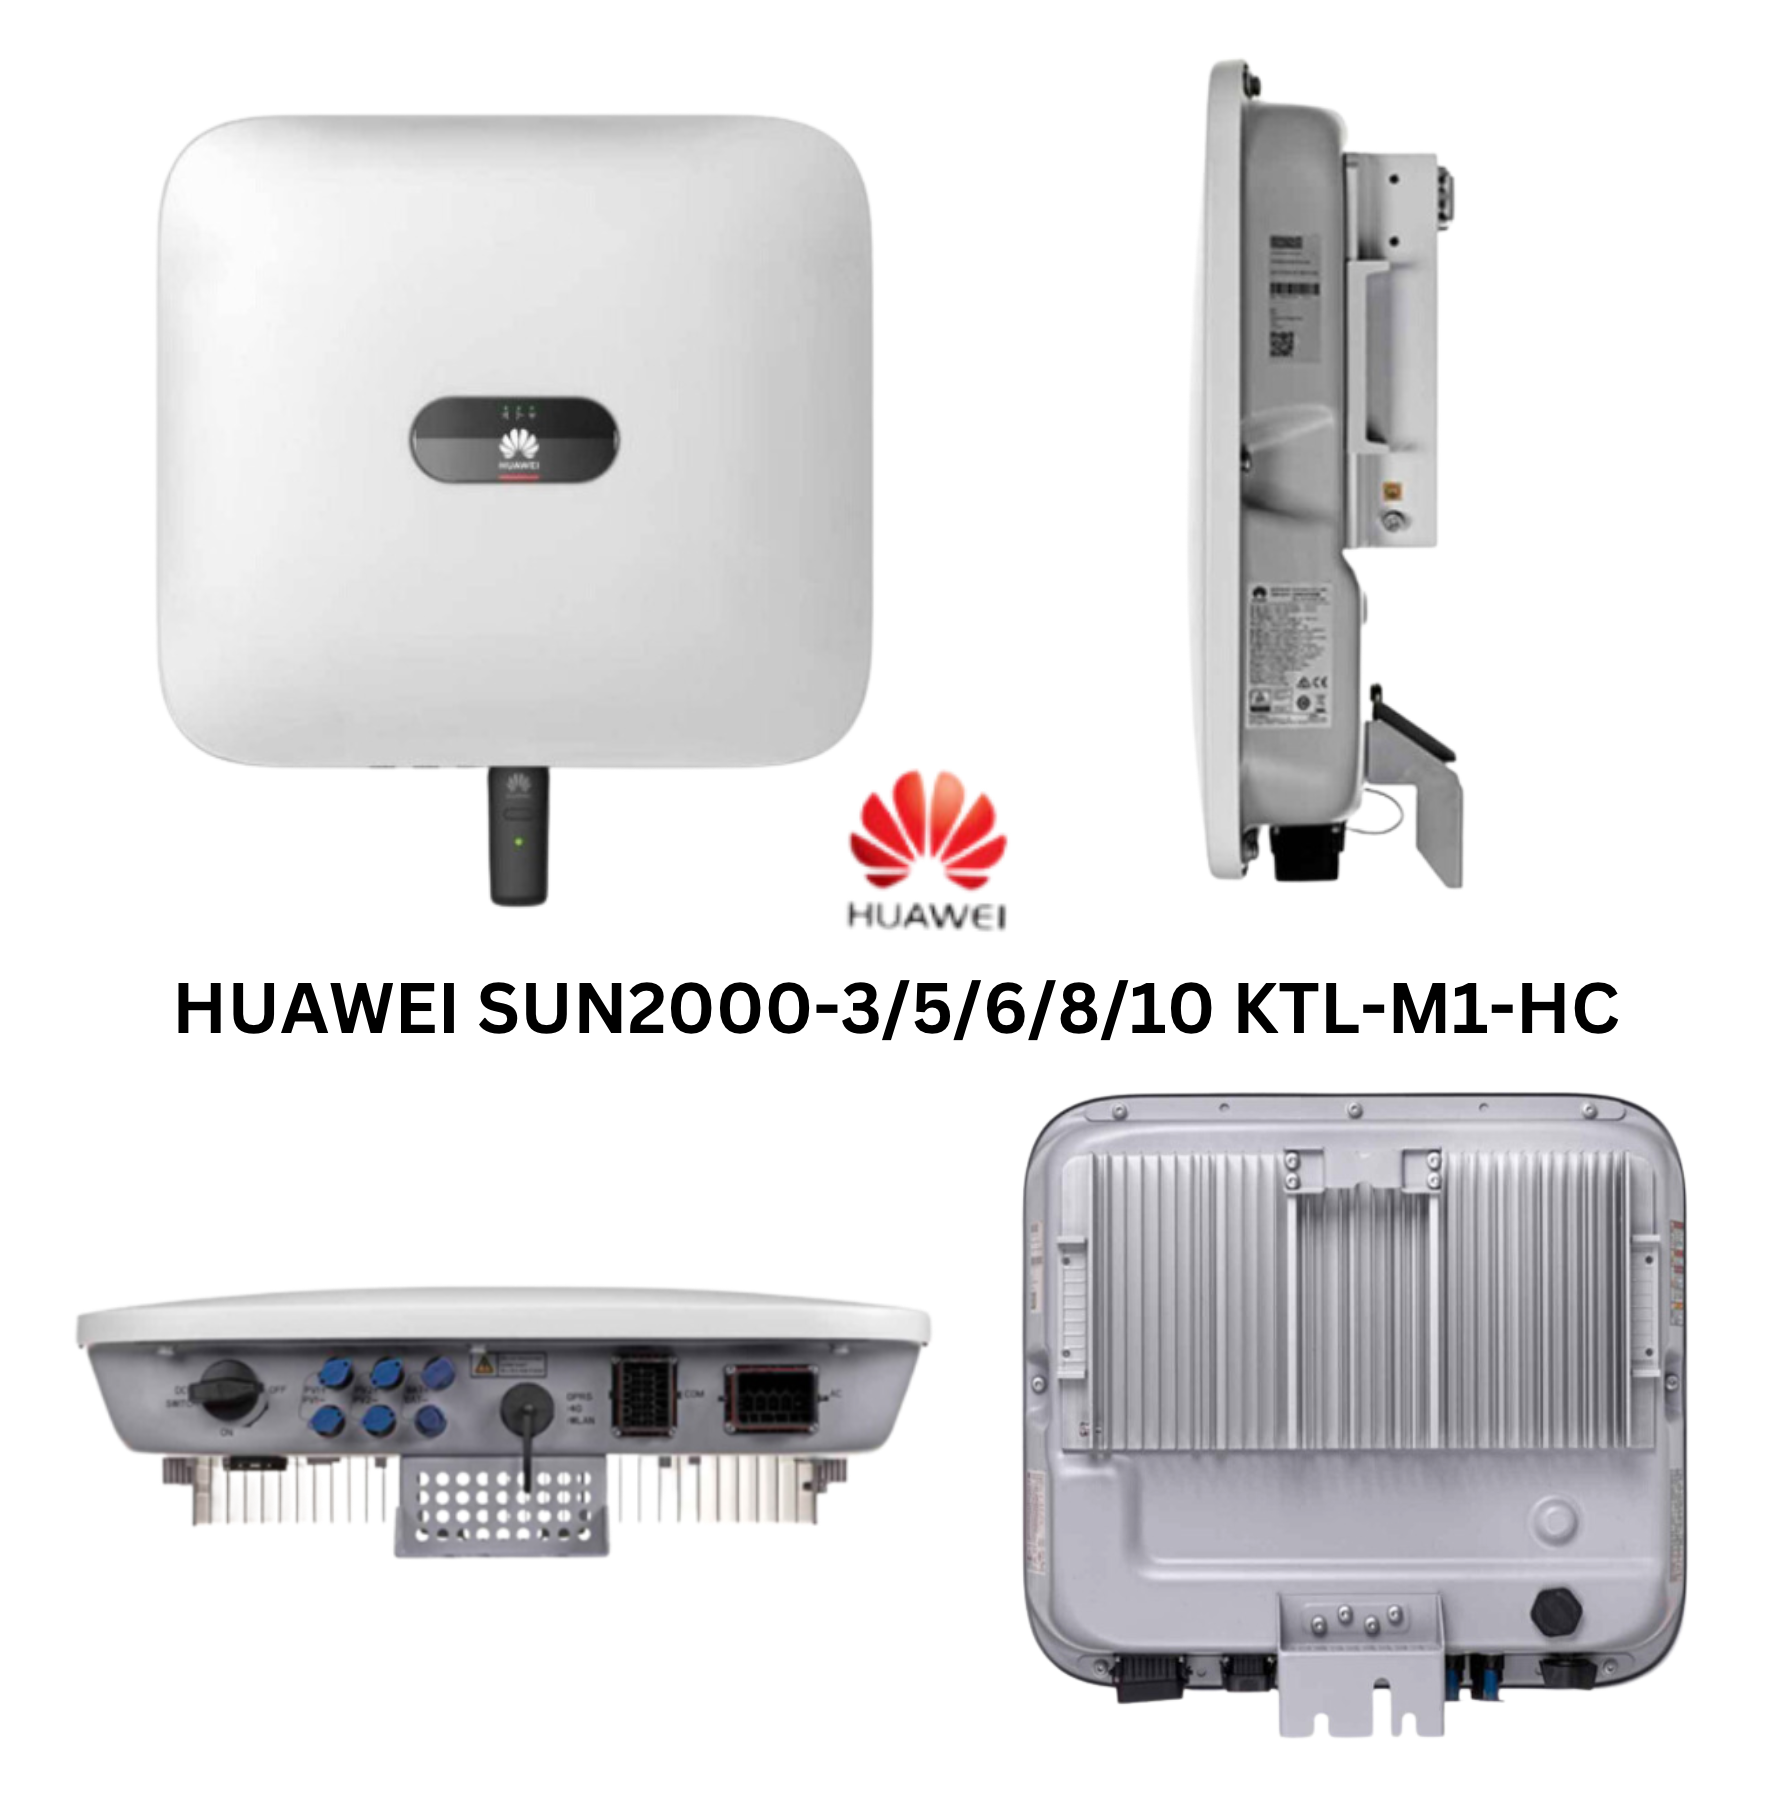 Huawei Complete PV-System Set - [6kW + 15kWh]